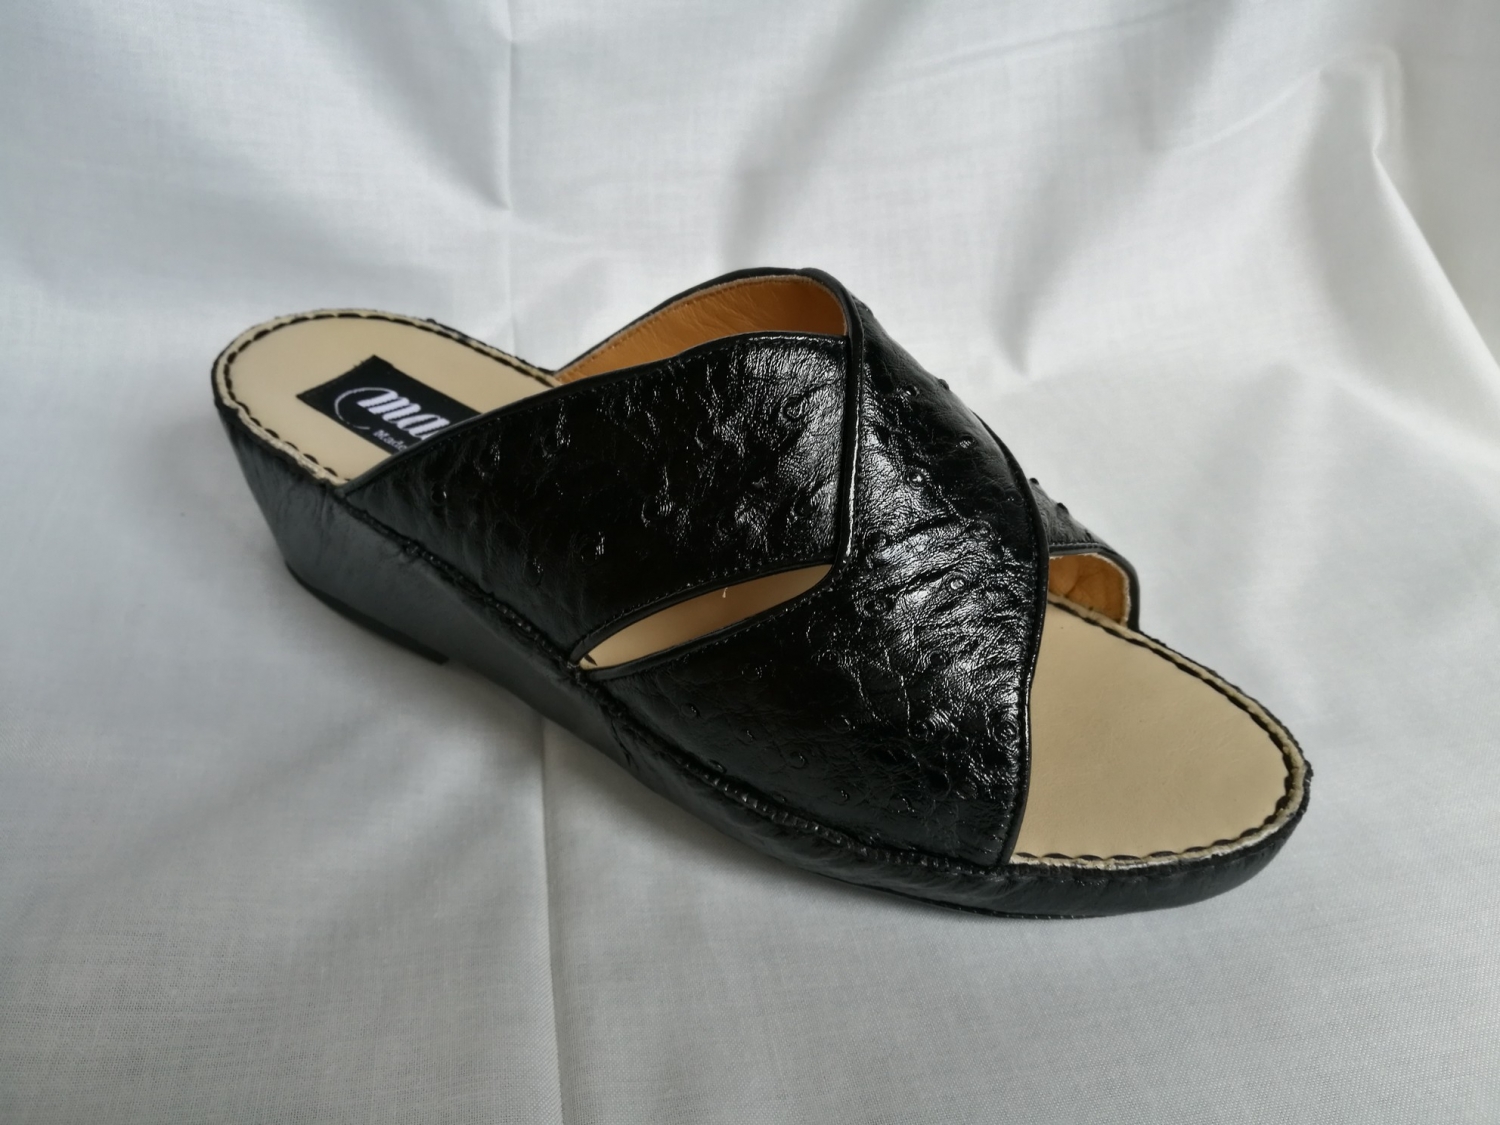 LADY SANDALS FOR AN ARAB PRINCESS SOLD THROUGH A SHOP IN LONDON